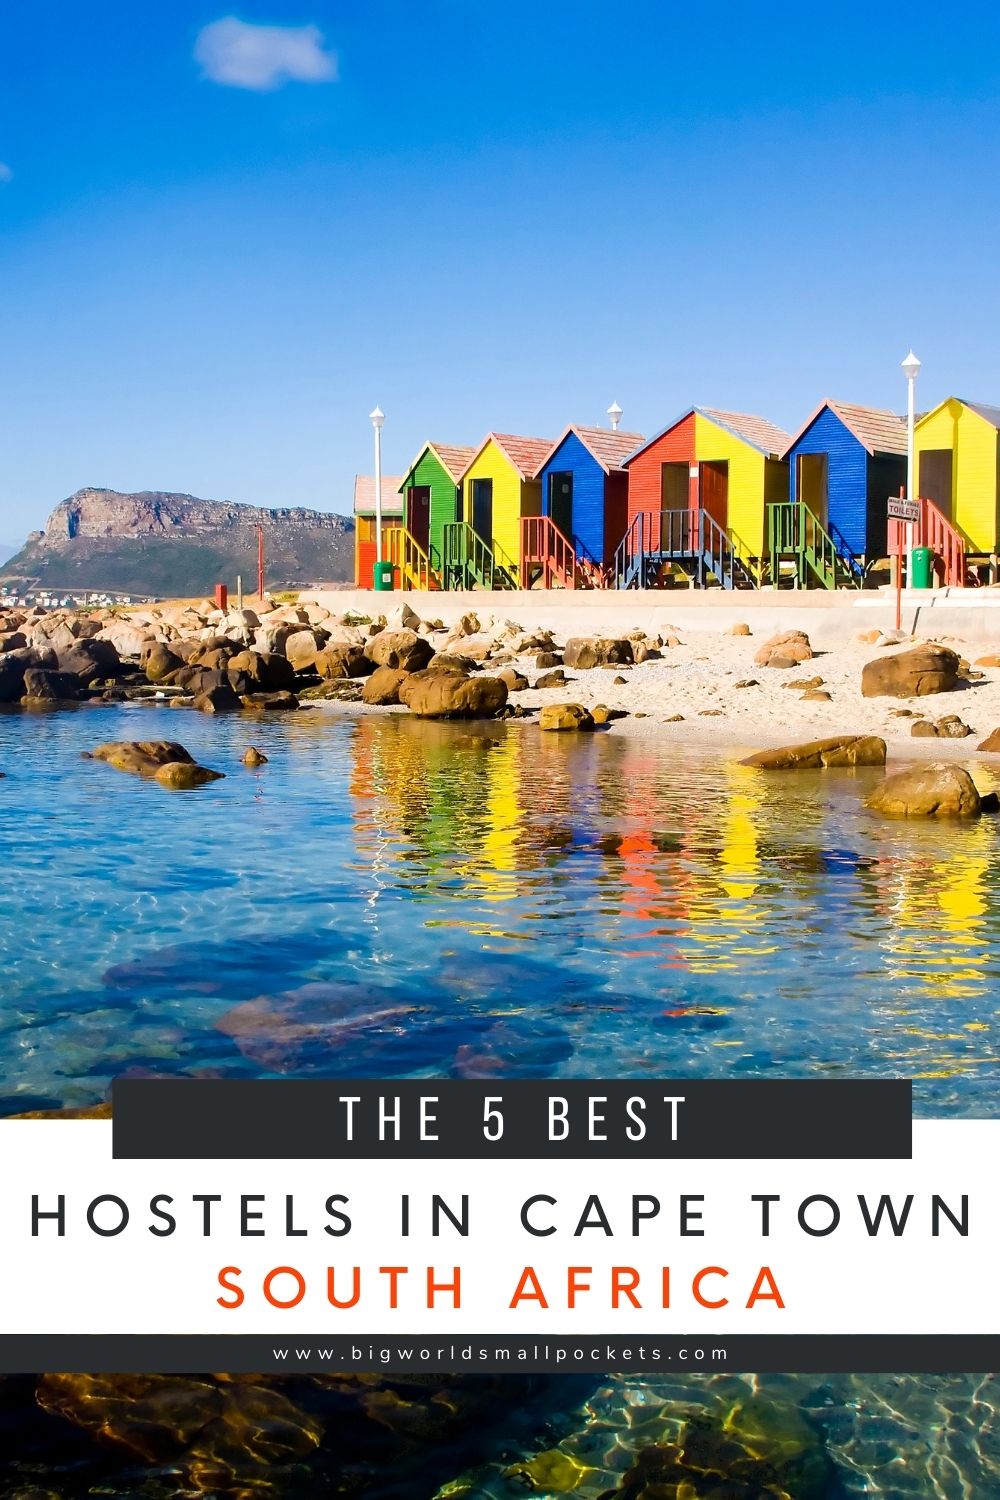 Top 5 Backpacker Hostels in Cape Town, South Africa